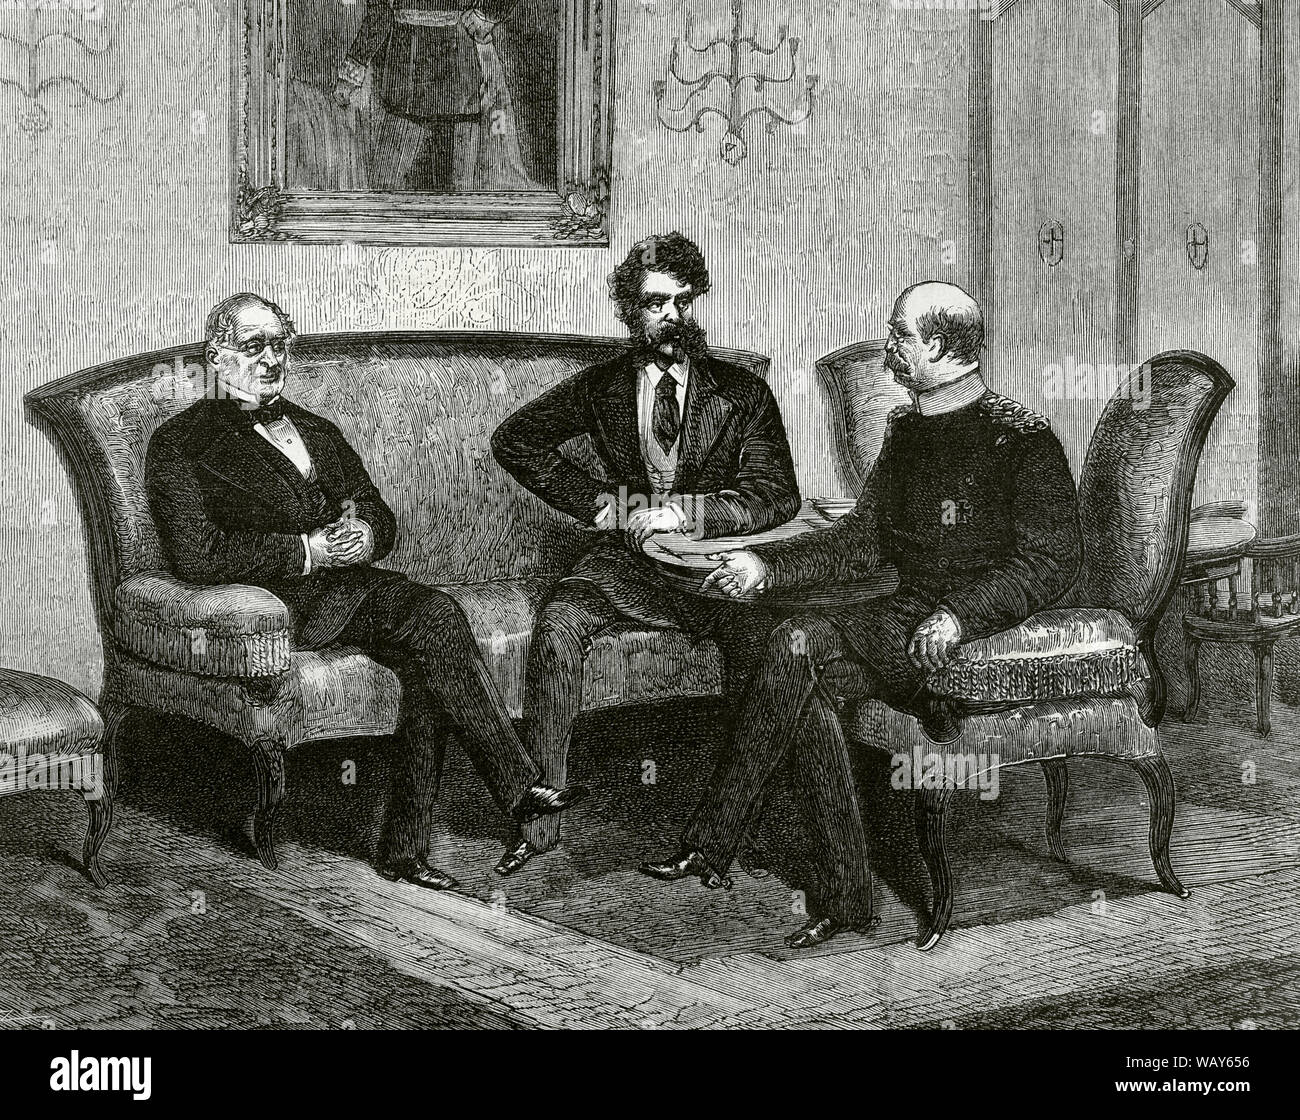 Germany, Berlin. Conference between the chancellors of the three northern empires about the Eastern Question. From left to right: Russian prince Alexander Gorchakov (1798-1883), Hungarian count Gyula Andrassy (1823-1890) and German prince Otto von Bismarck (1815-1898). Engraving. La Ilustracion Española y Americana, June 22, 1876. Stock Photo